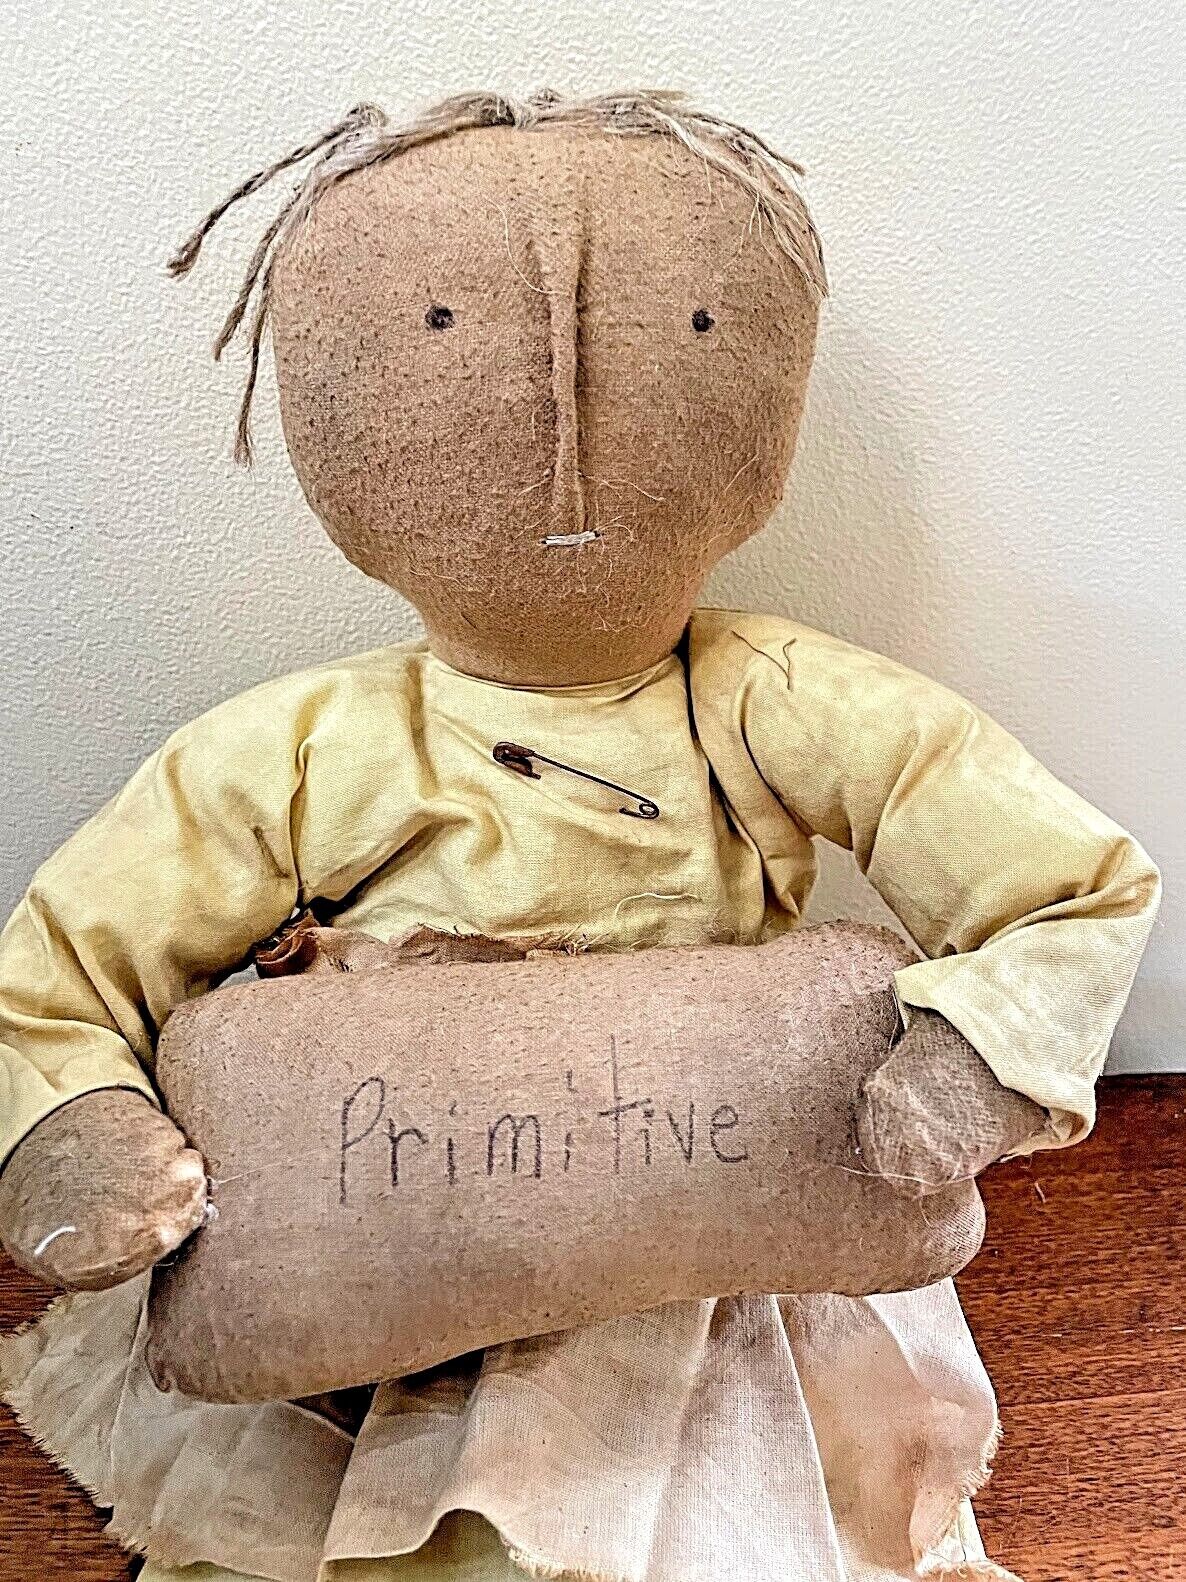 Primitive Handcrafted Folk Art 18&quot; Colonial Doll w/ Pillow - The Primitive Pineapple Collection